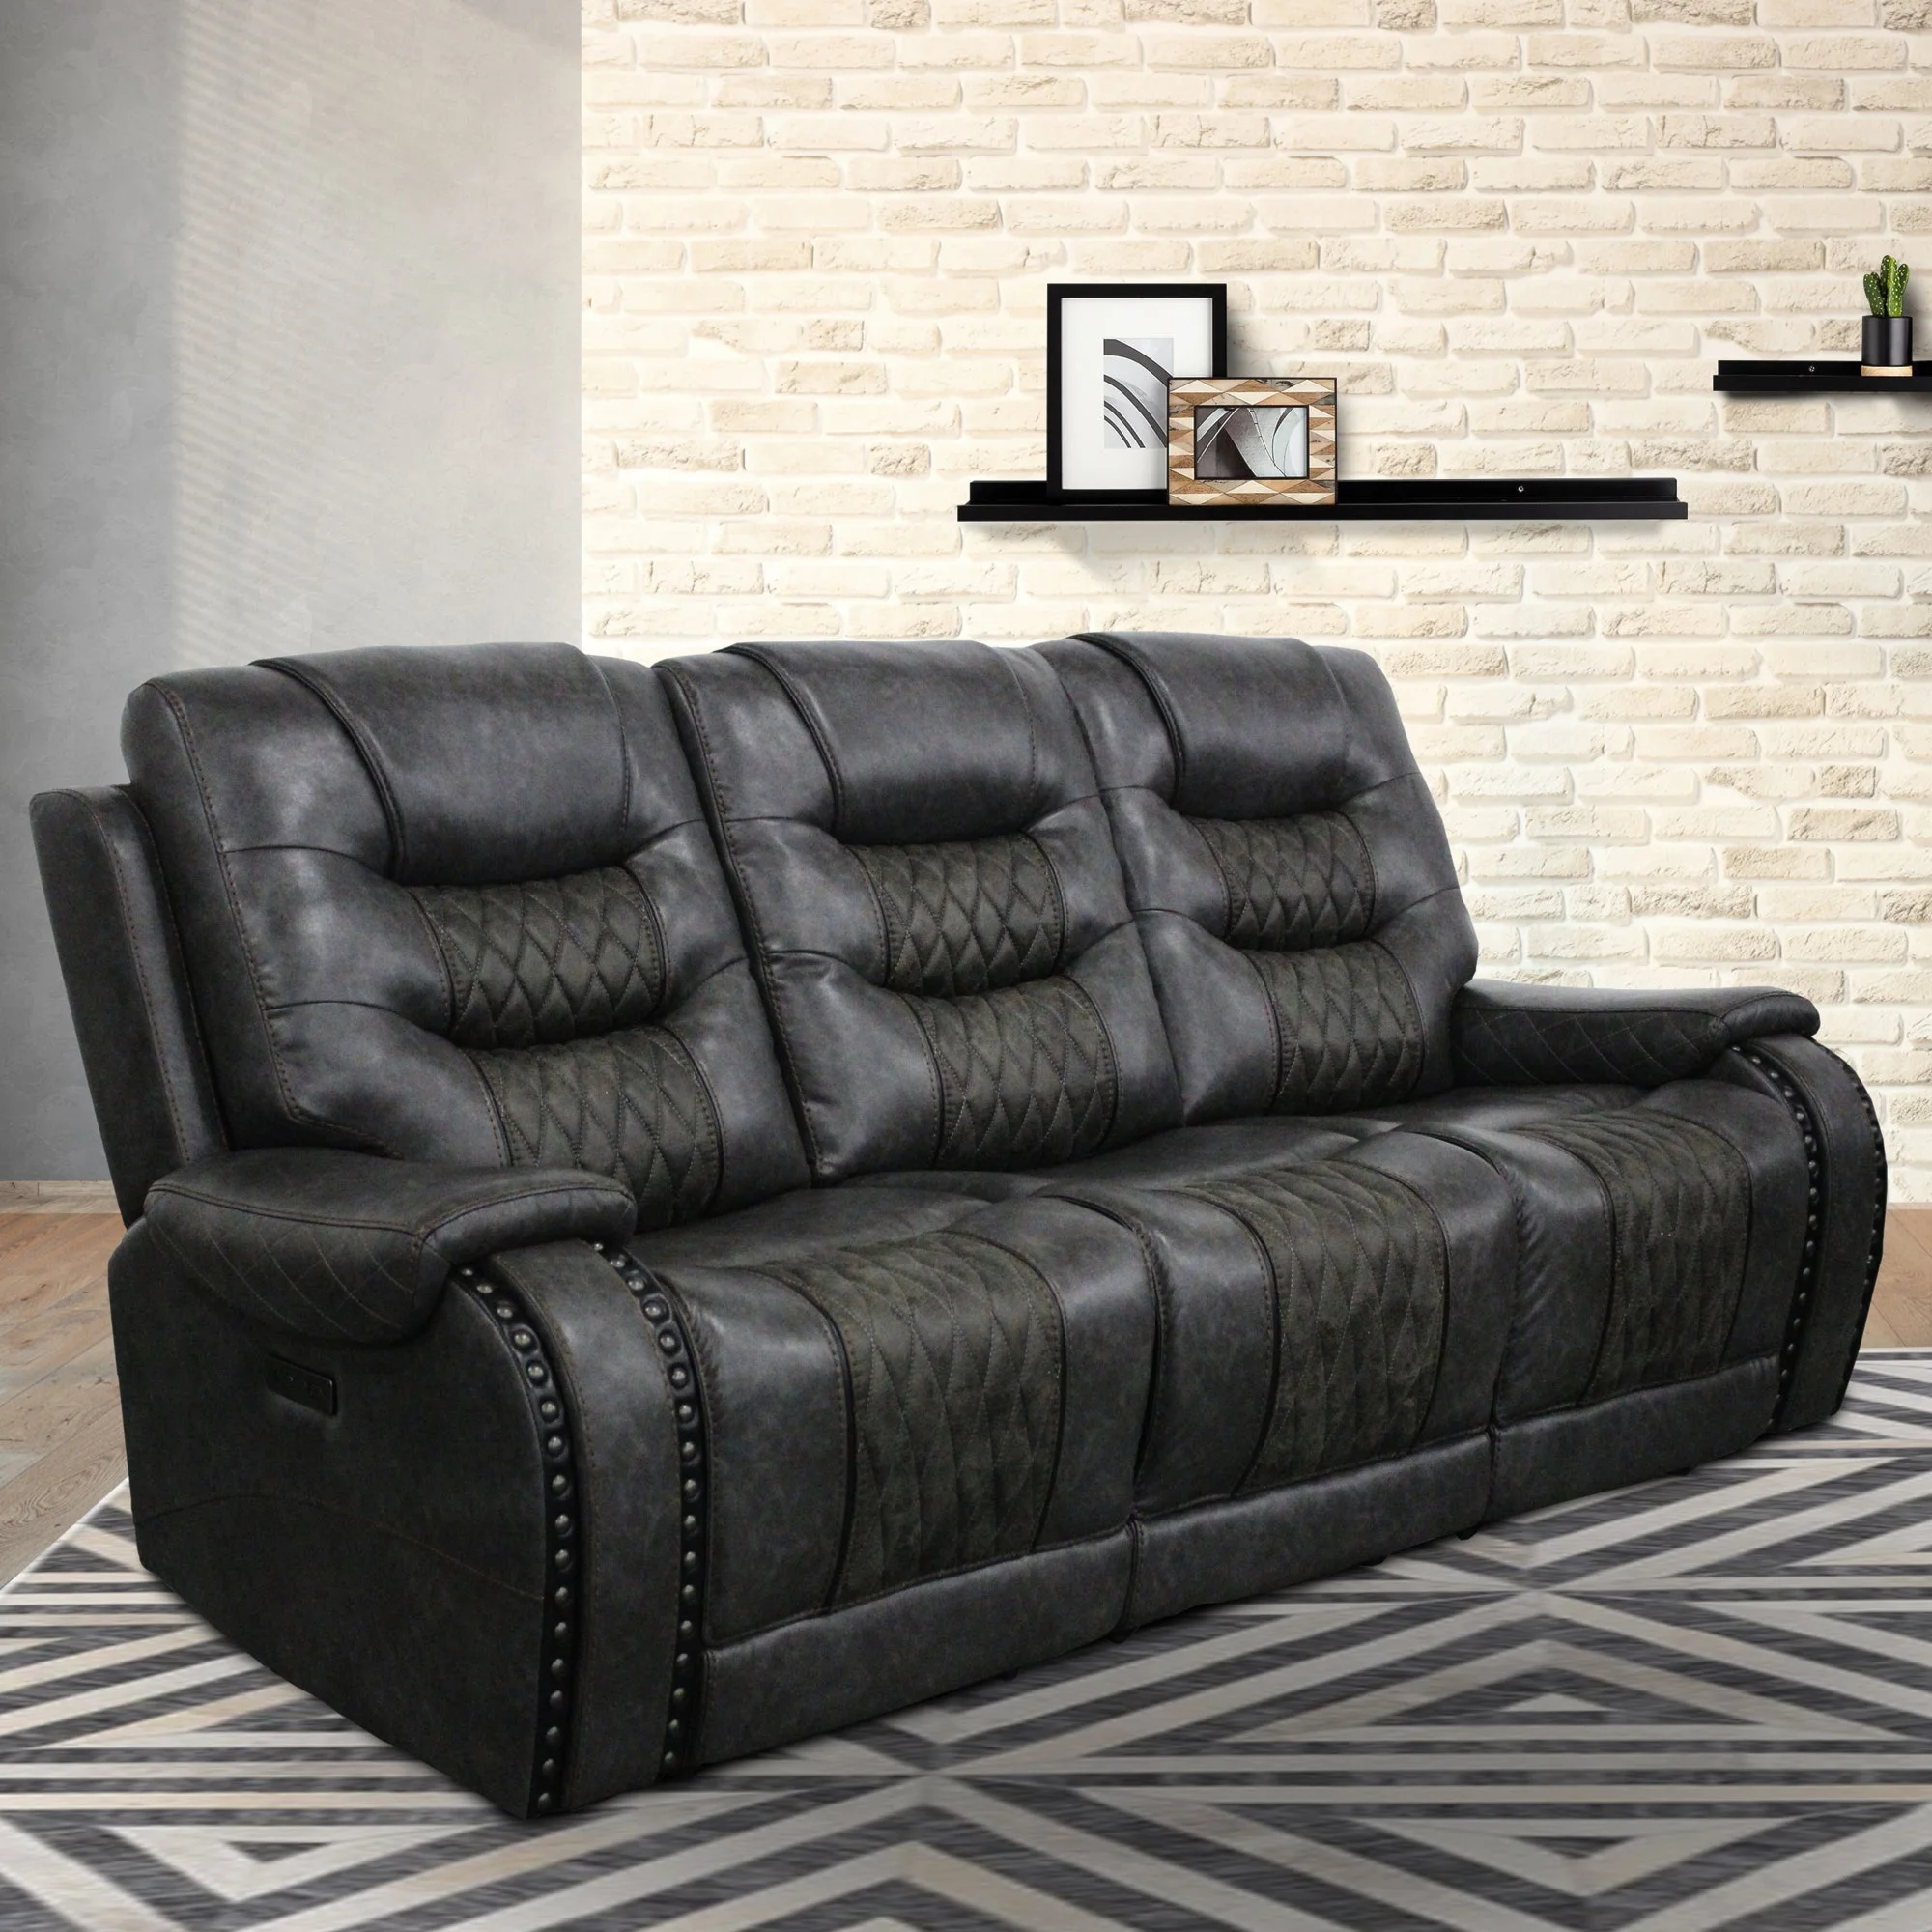 Upholstery Faux Leather for Cars and Sofas ♥ Up to 80% Off - I